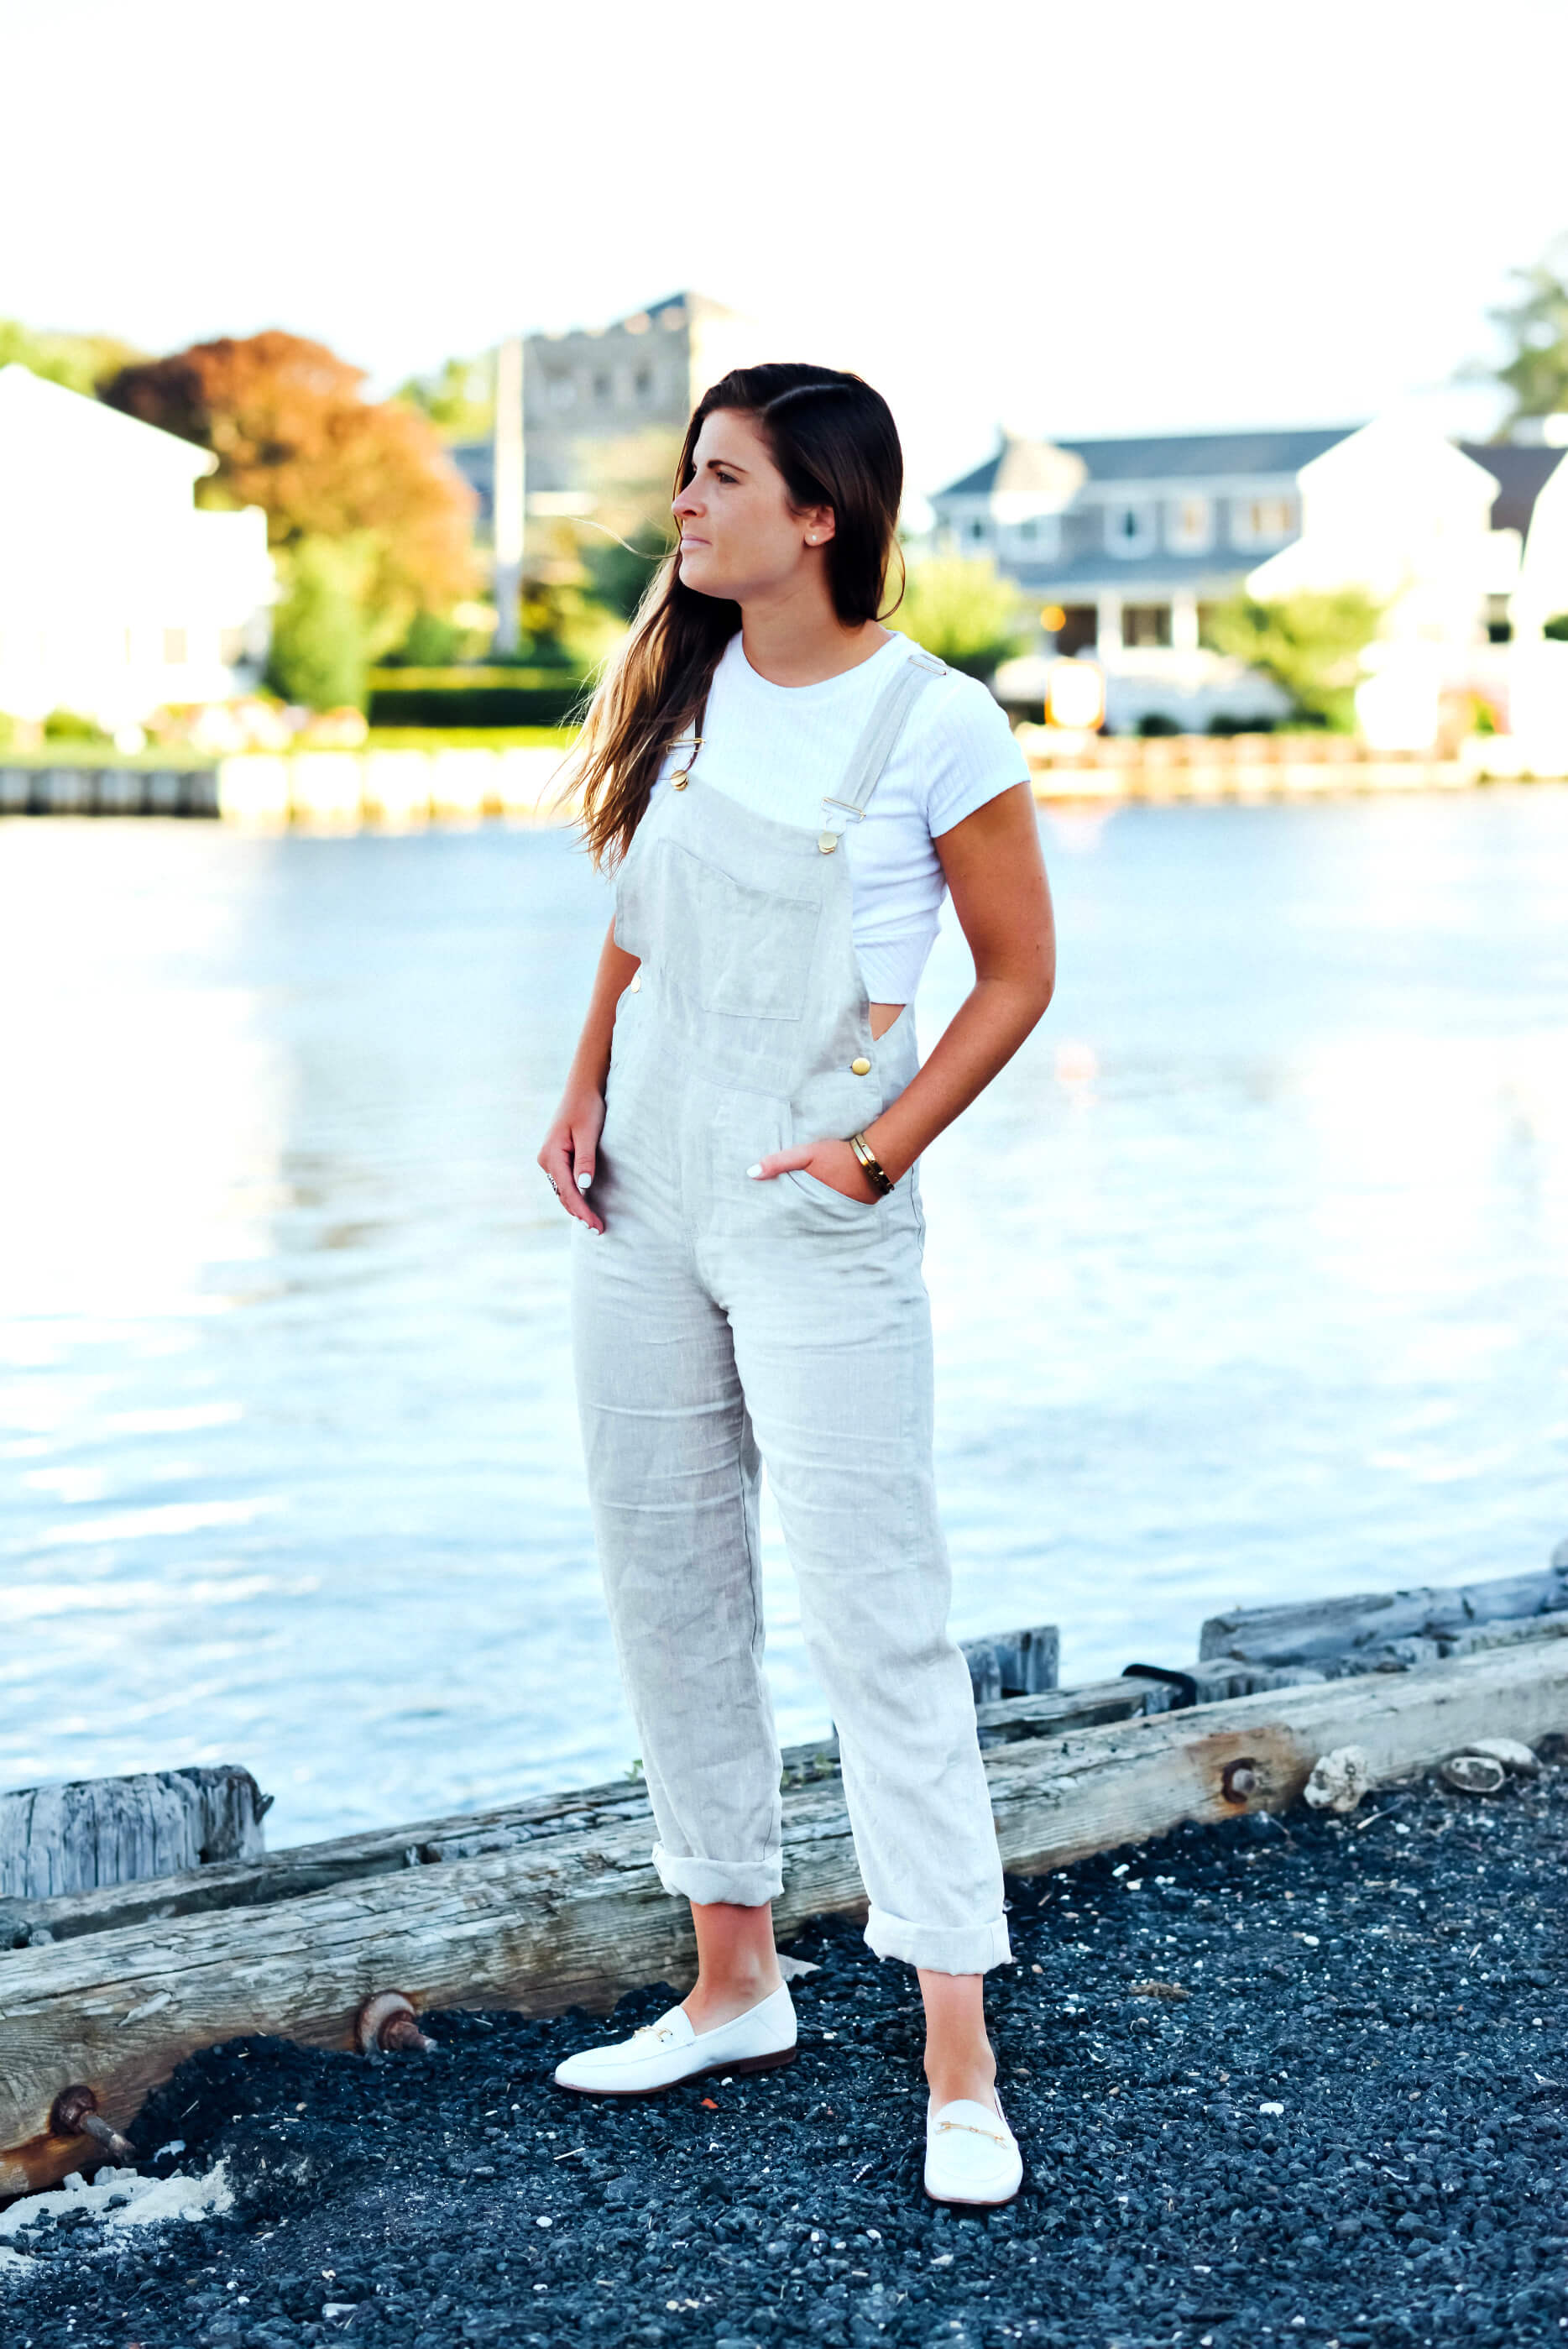 SSO By Danielle Neutral Linen Basic Overalls, Sam Edelman Loraine White Bit Loafer, Summer Outfit, Tilden of To Be Bright